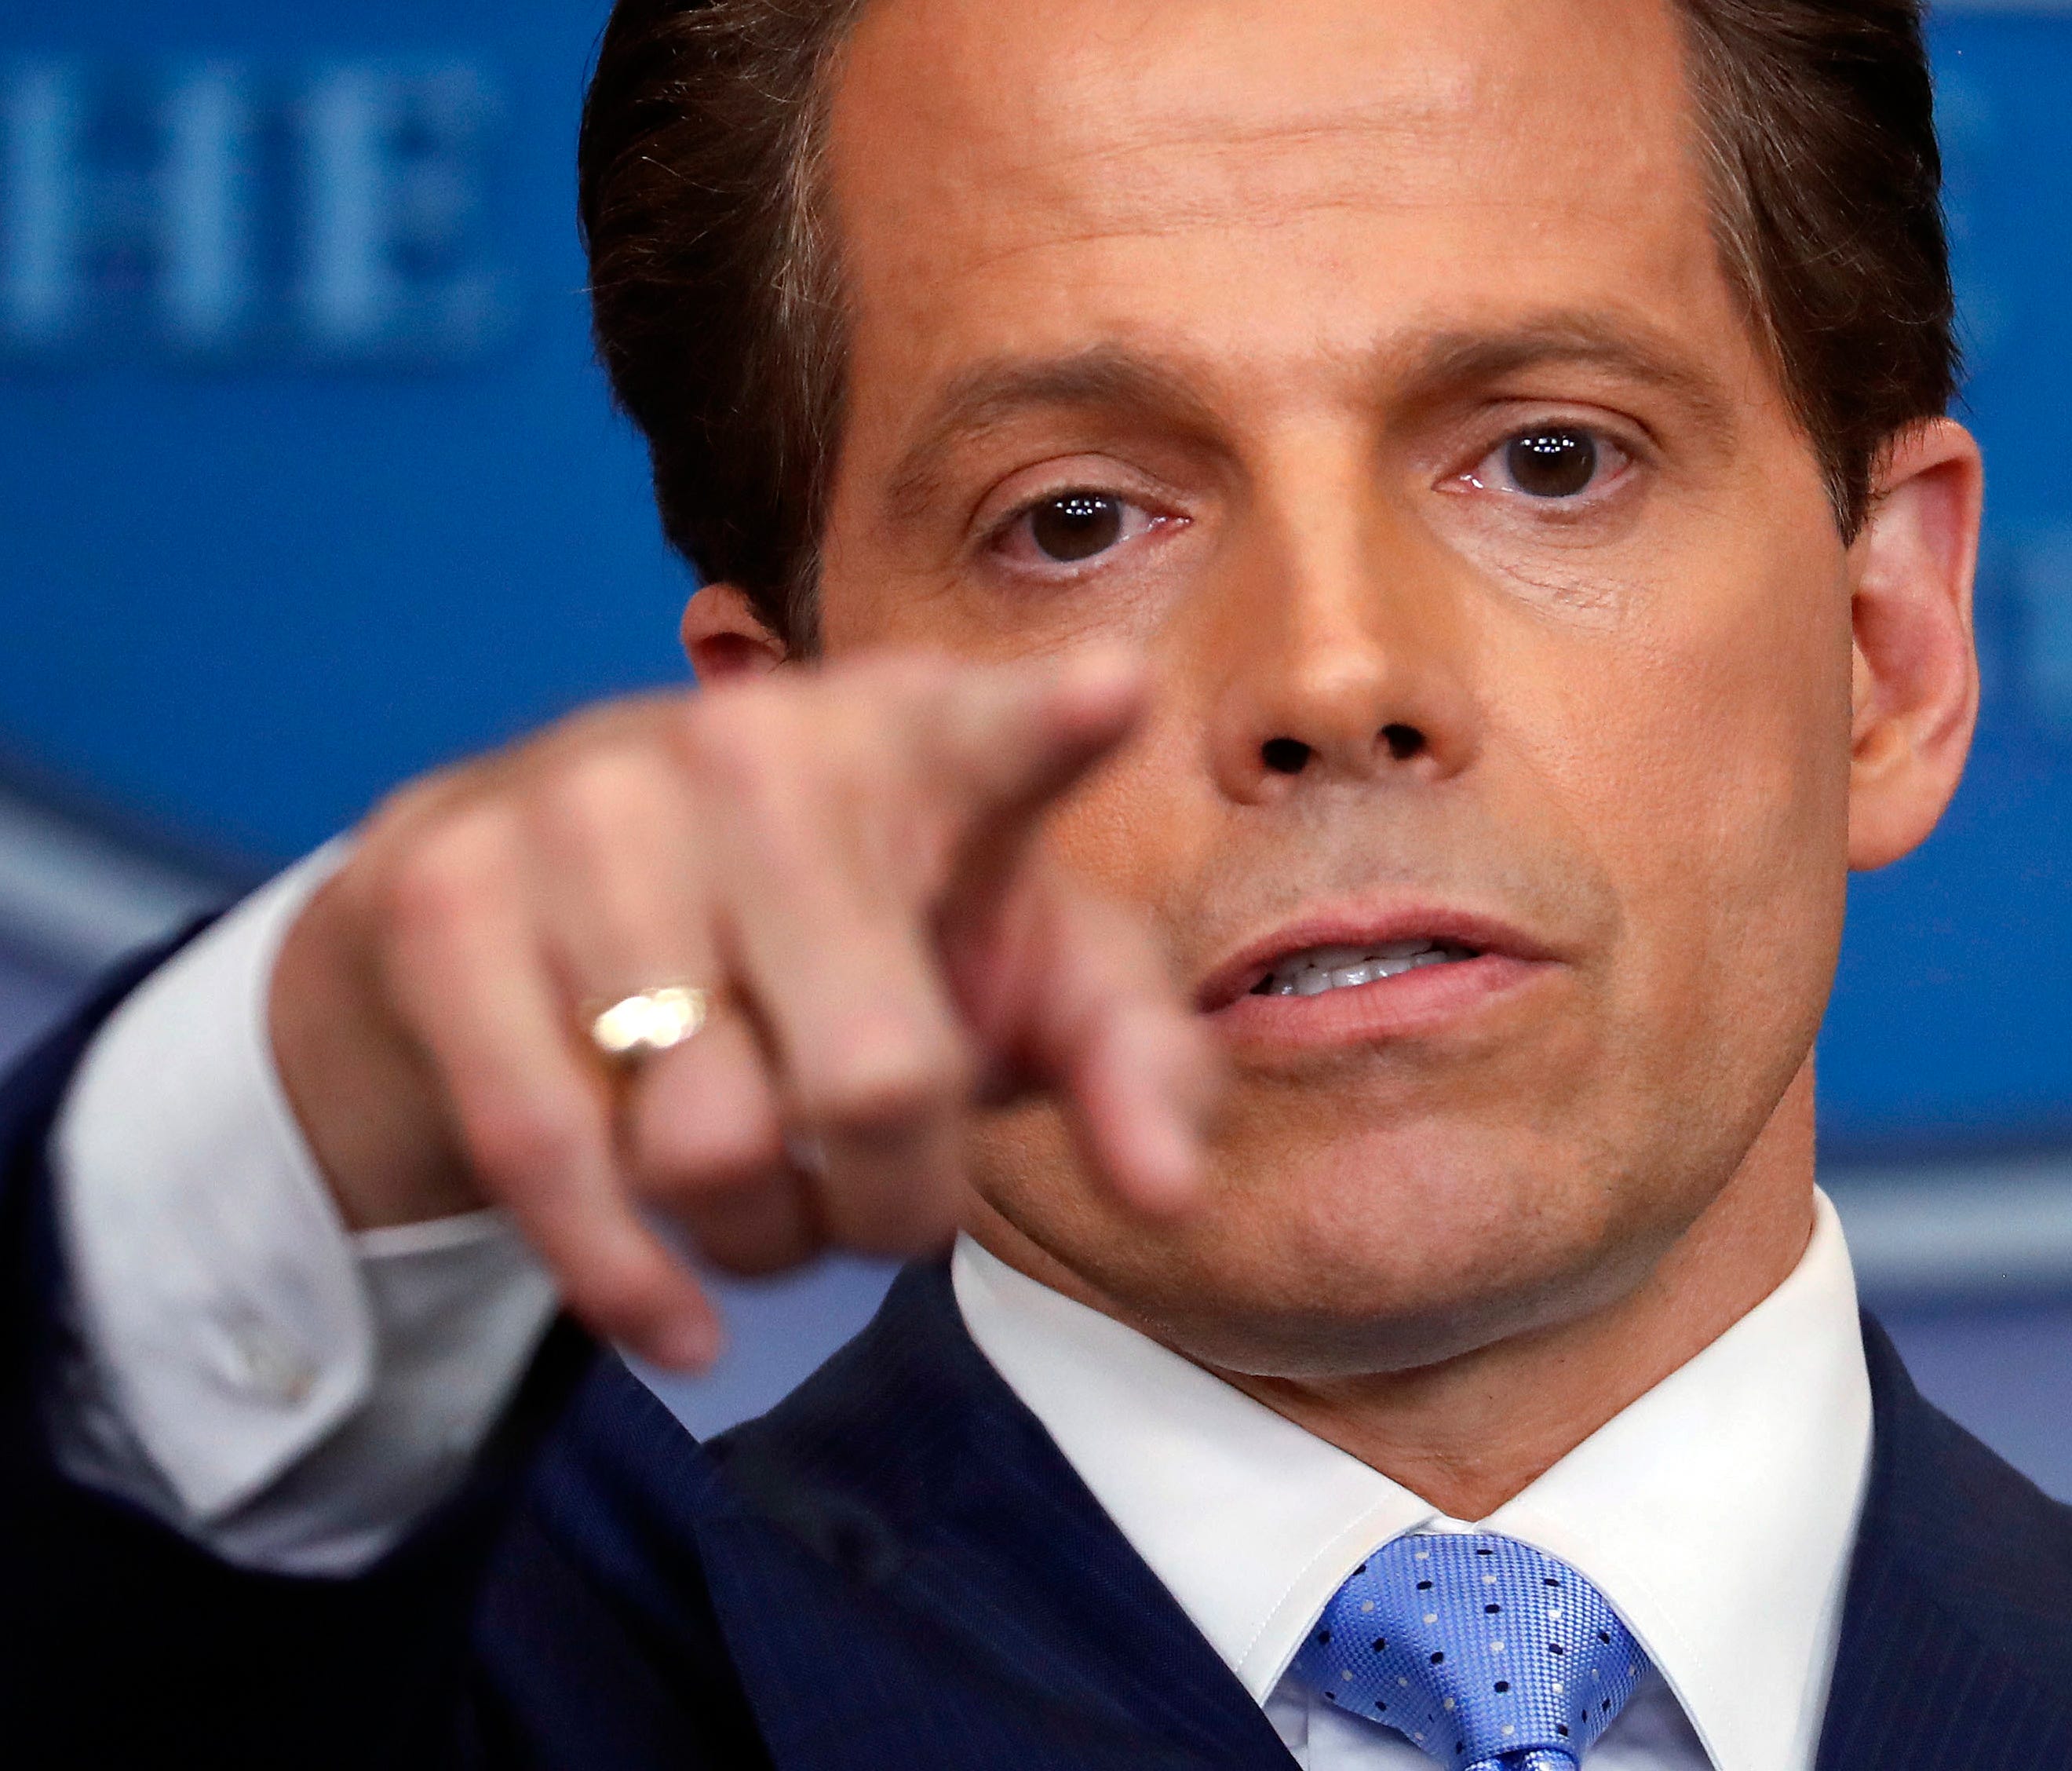 In this July 21, 2017 photo, incoming White House communications director Anthony Scaramucci points as he answers questions from members of the media during the press briefing in the Brady Press Briefing room of the White House in Washington.